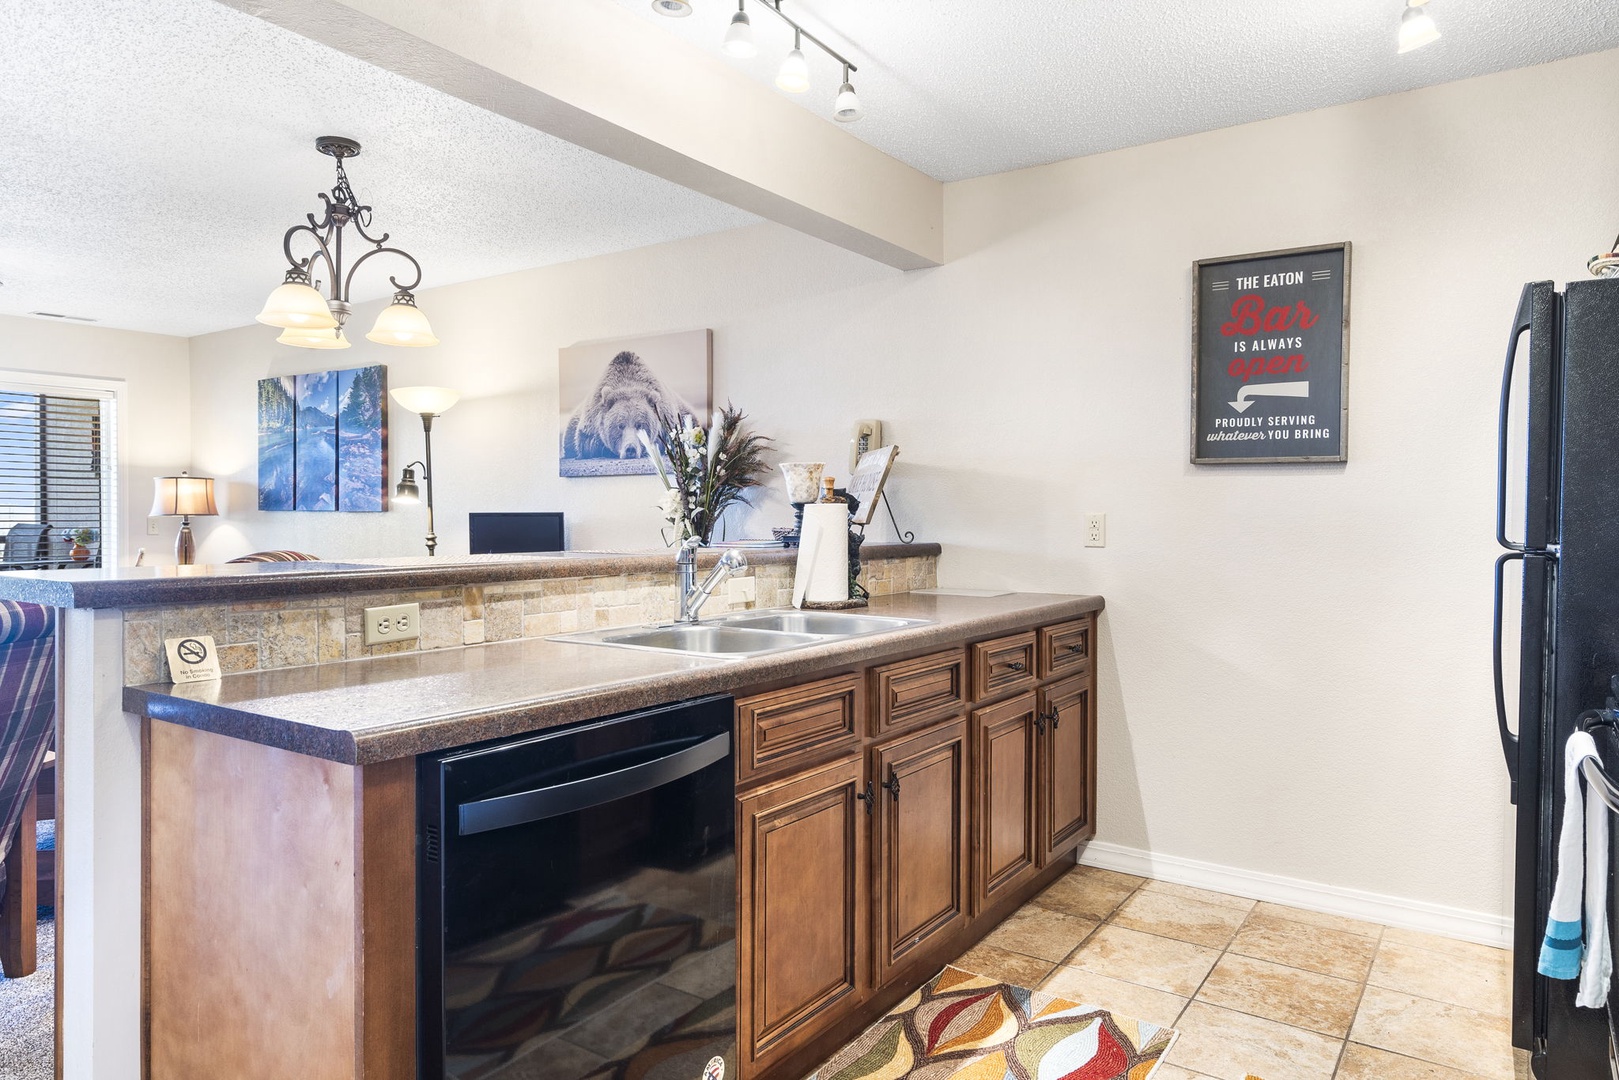 The spacious kitchen offers ample space & all the comforts of home